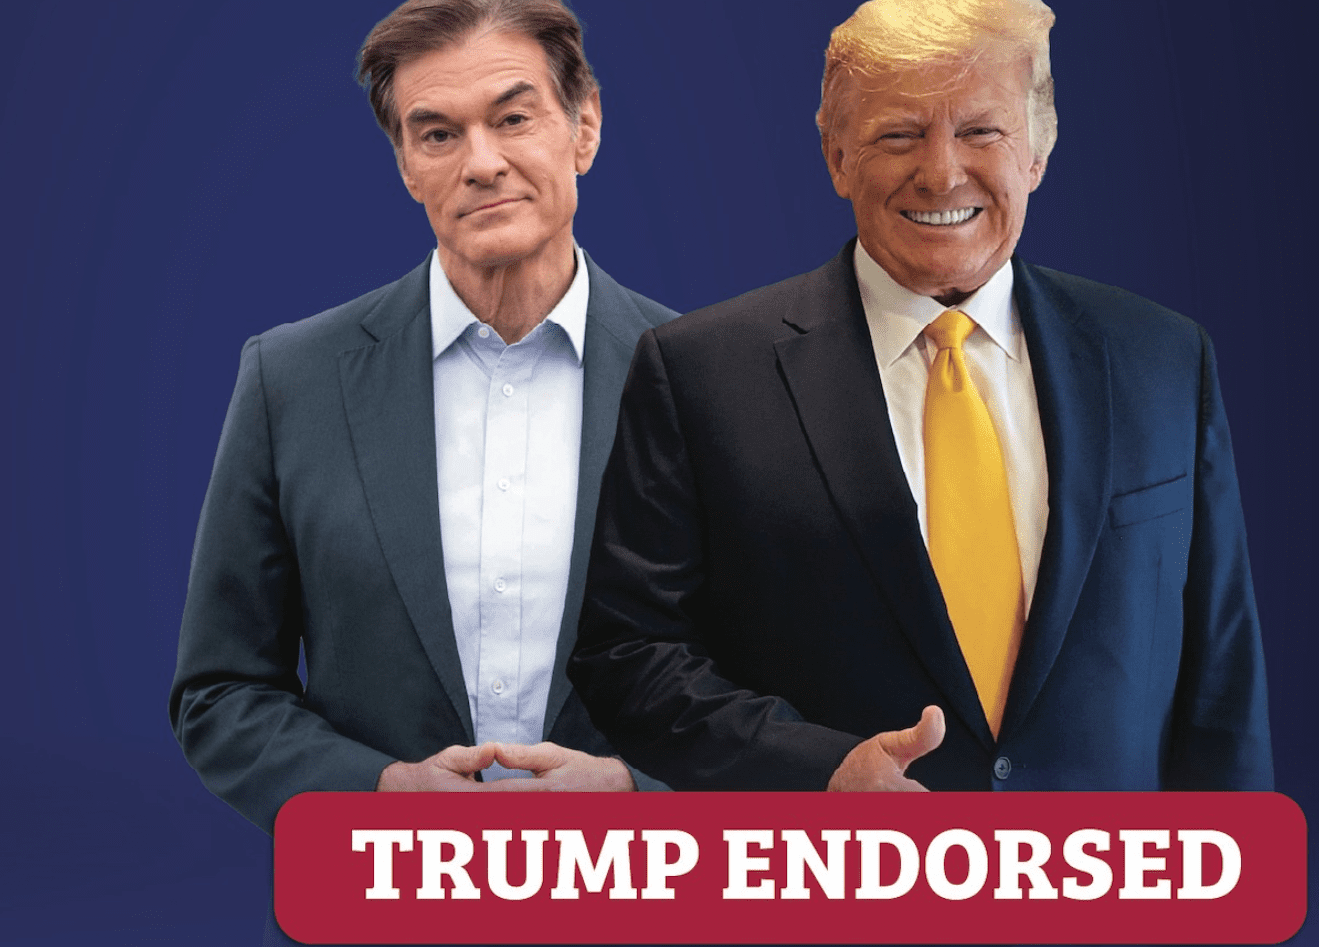 Endorsed by President Trump